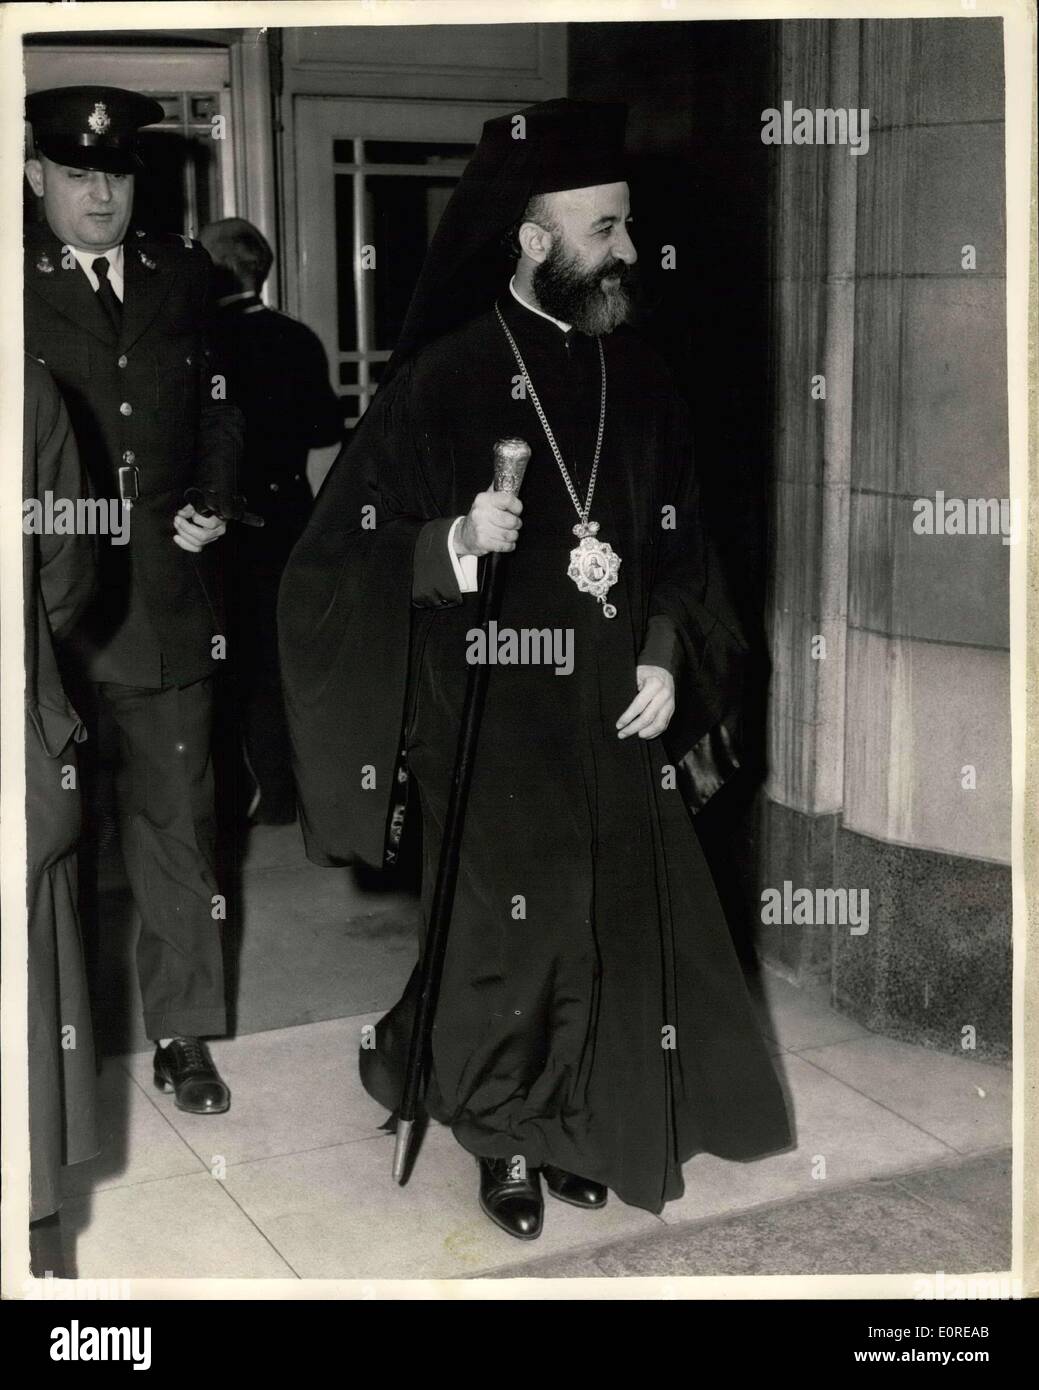 Feb. 19, 1959 - Makarios Leaving The Dorchester Hotel To Attend The Cyprus Conference: Photo Shows Archbishop Makarios seen leaving the Dorchester Hotel on his Lancaster House to attend today's Cyprus Conference. Stock Photo